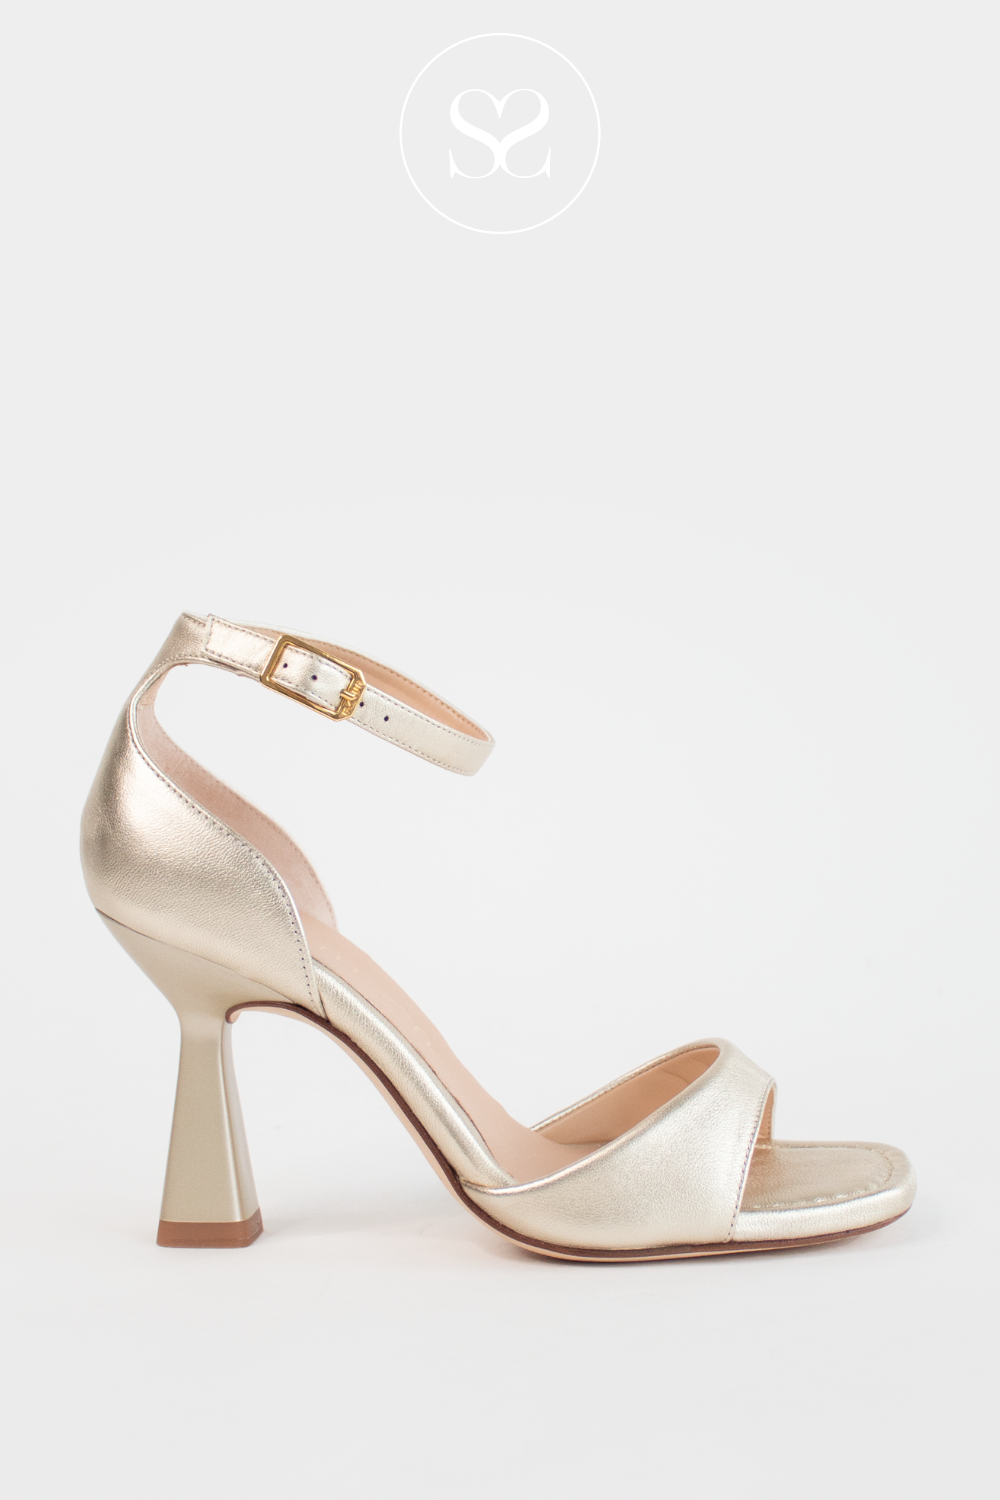 Unisa safira gold high heel barely there sandals ireland